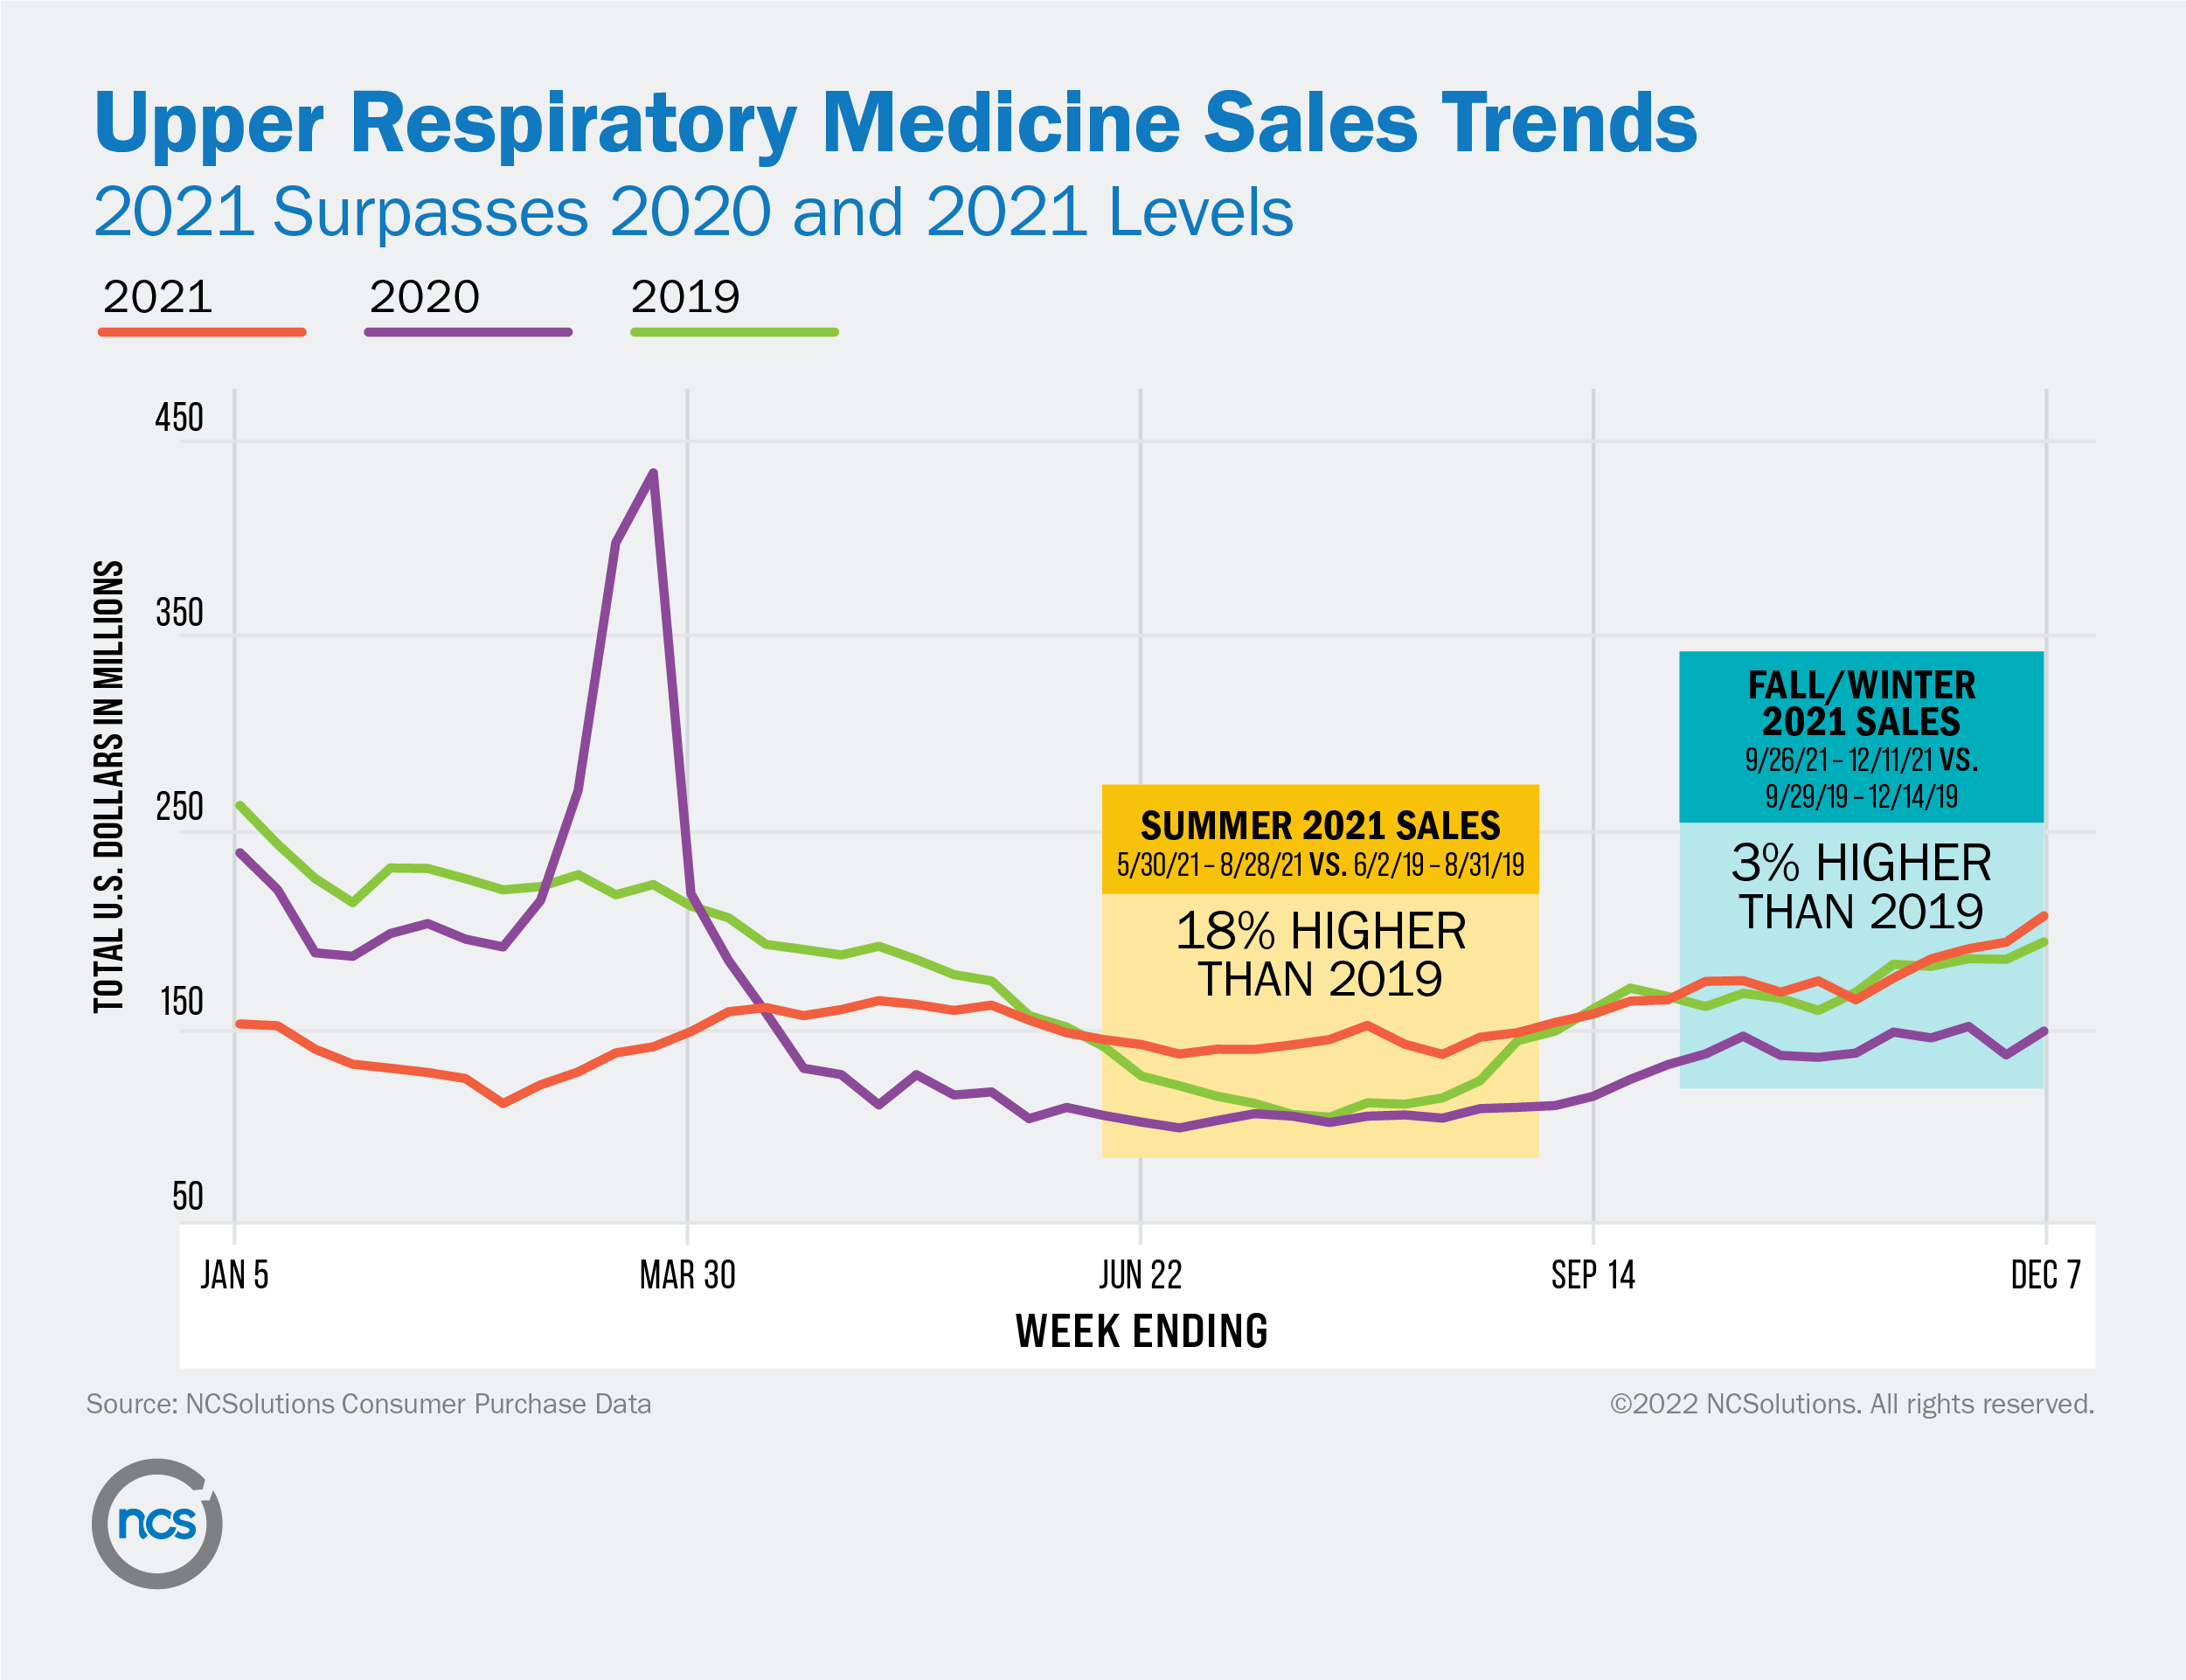 2021 upper respiratory medicine sales surpass 2019 levels this cold and flu season, according to NCSolutions data